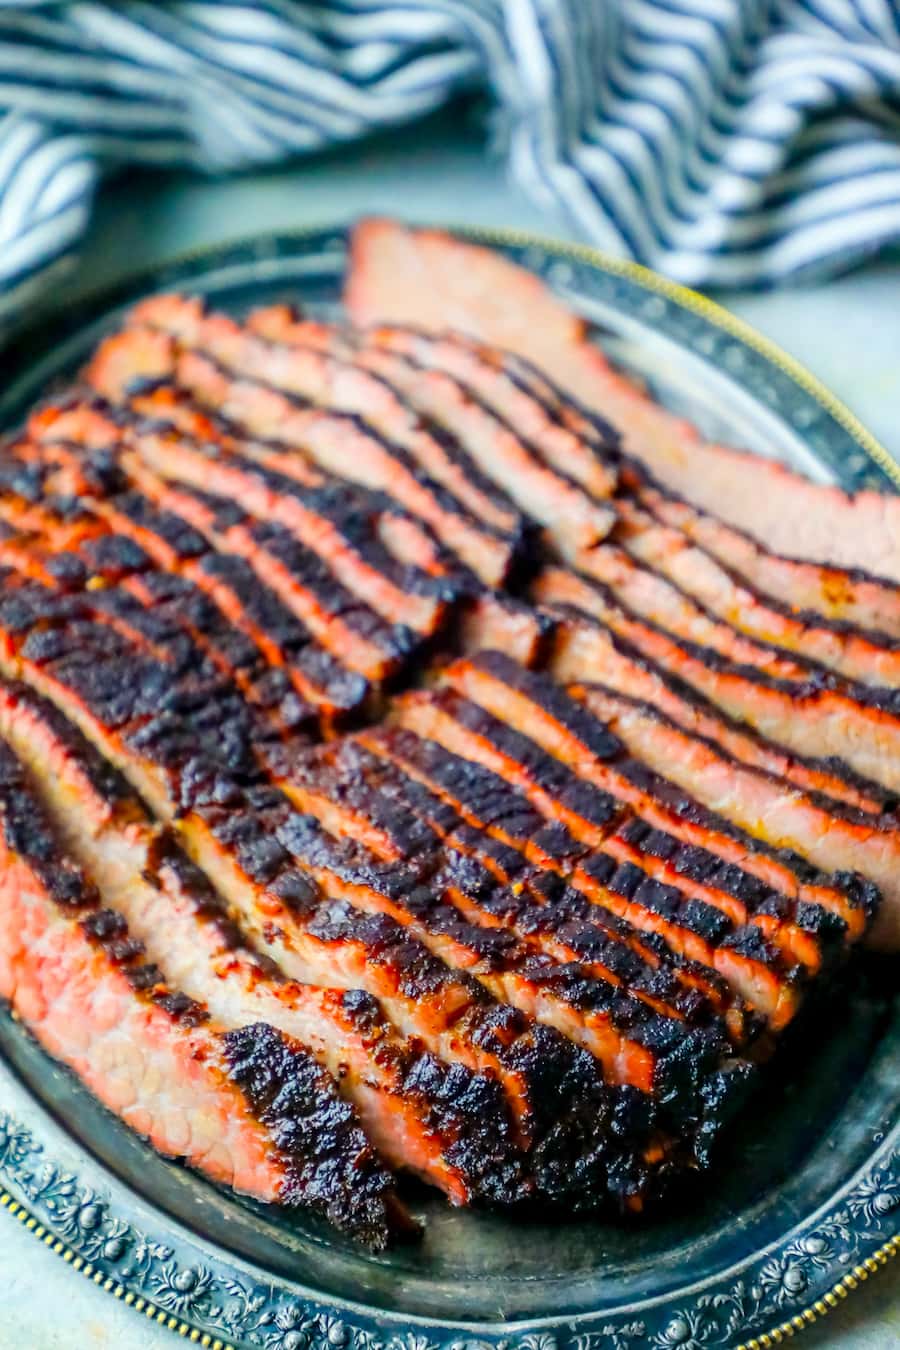 smoked brisket sliced on an antique metal plate